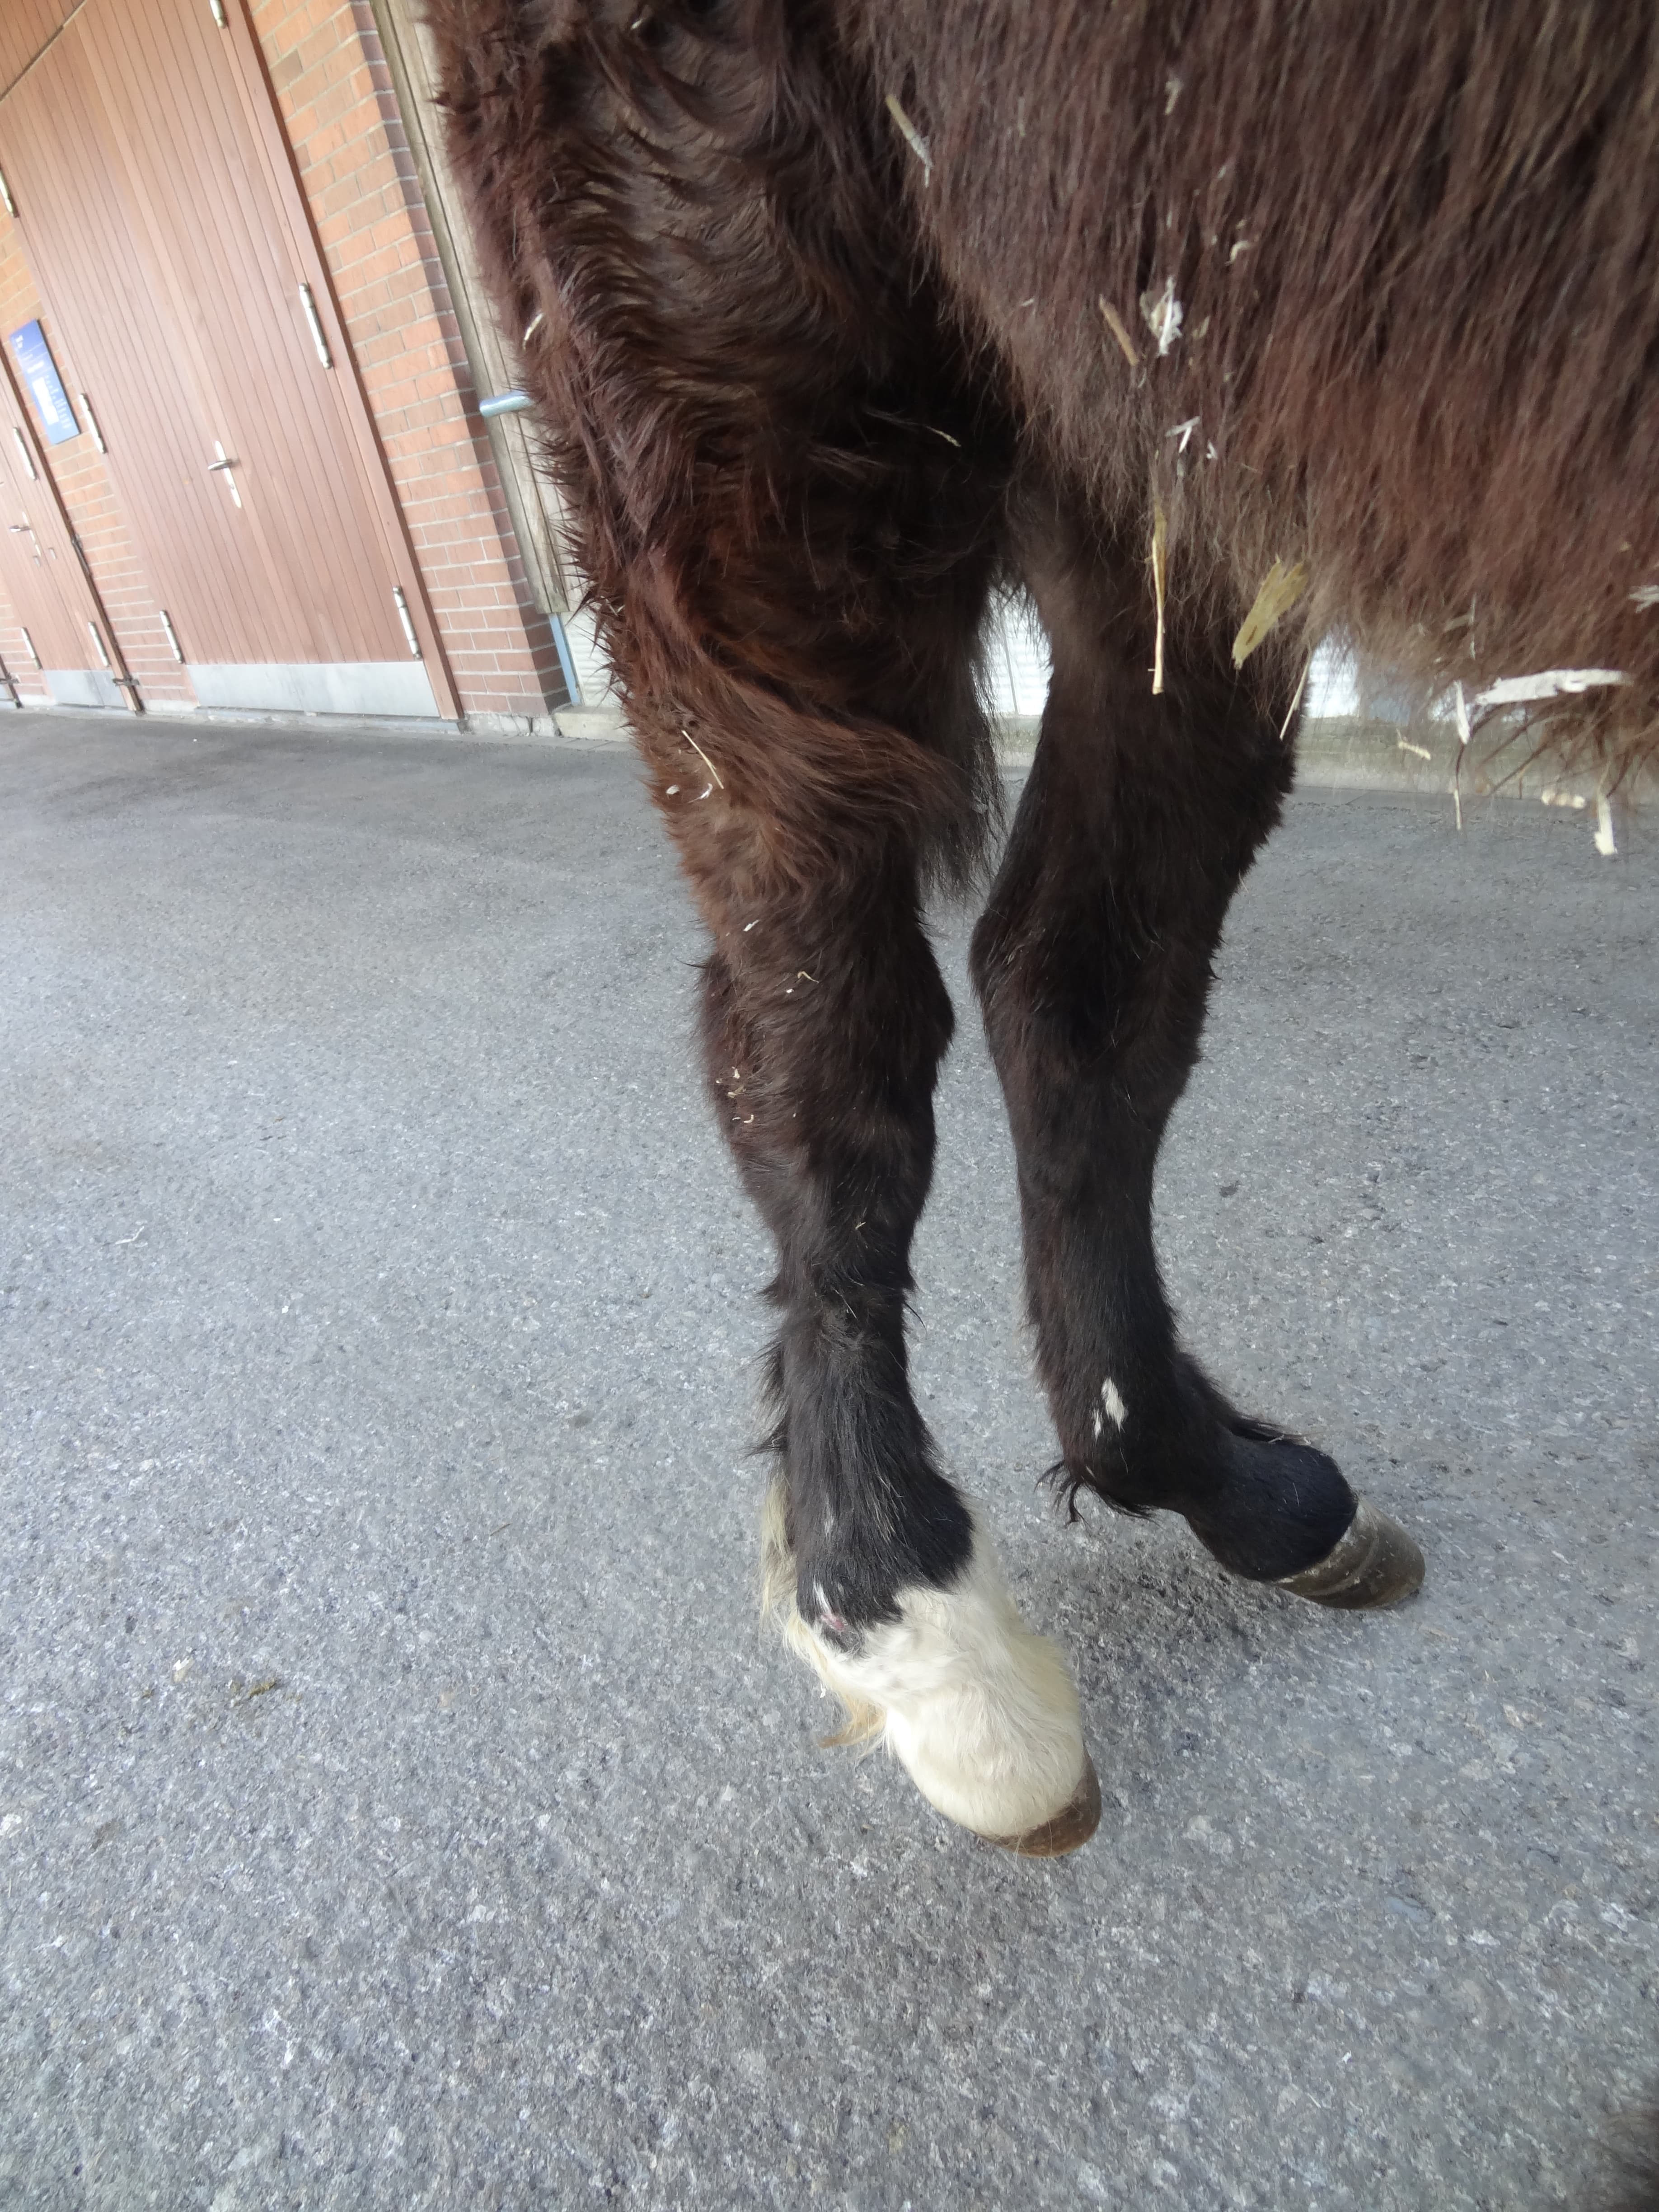 Horse before surgery with deformed hind legs